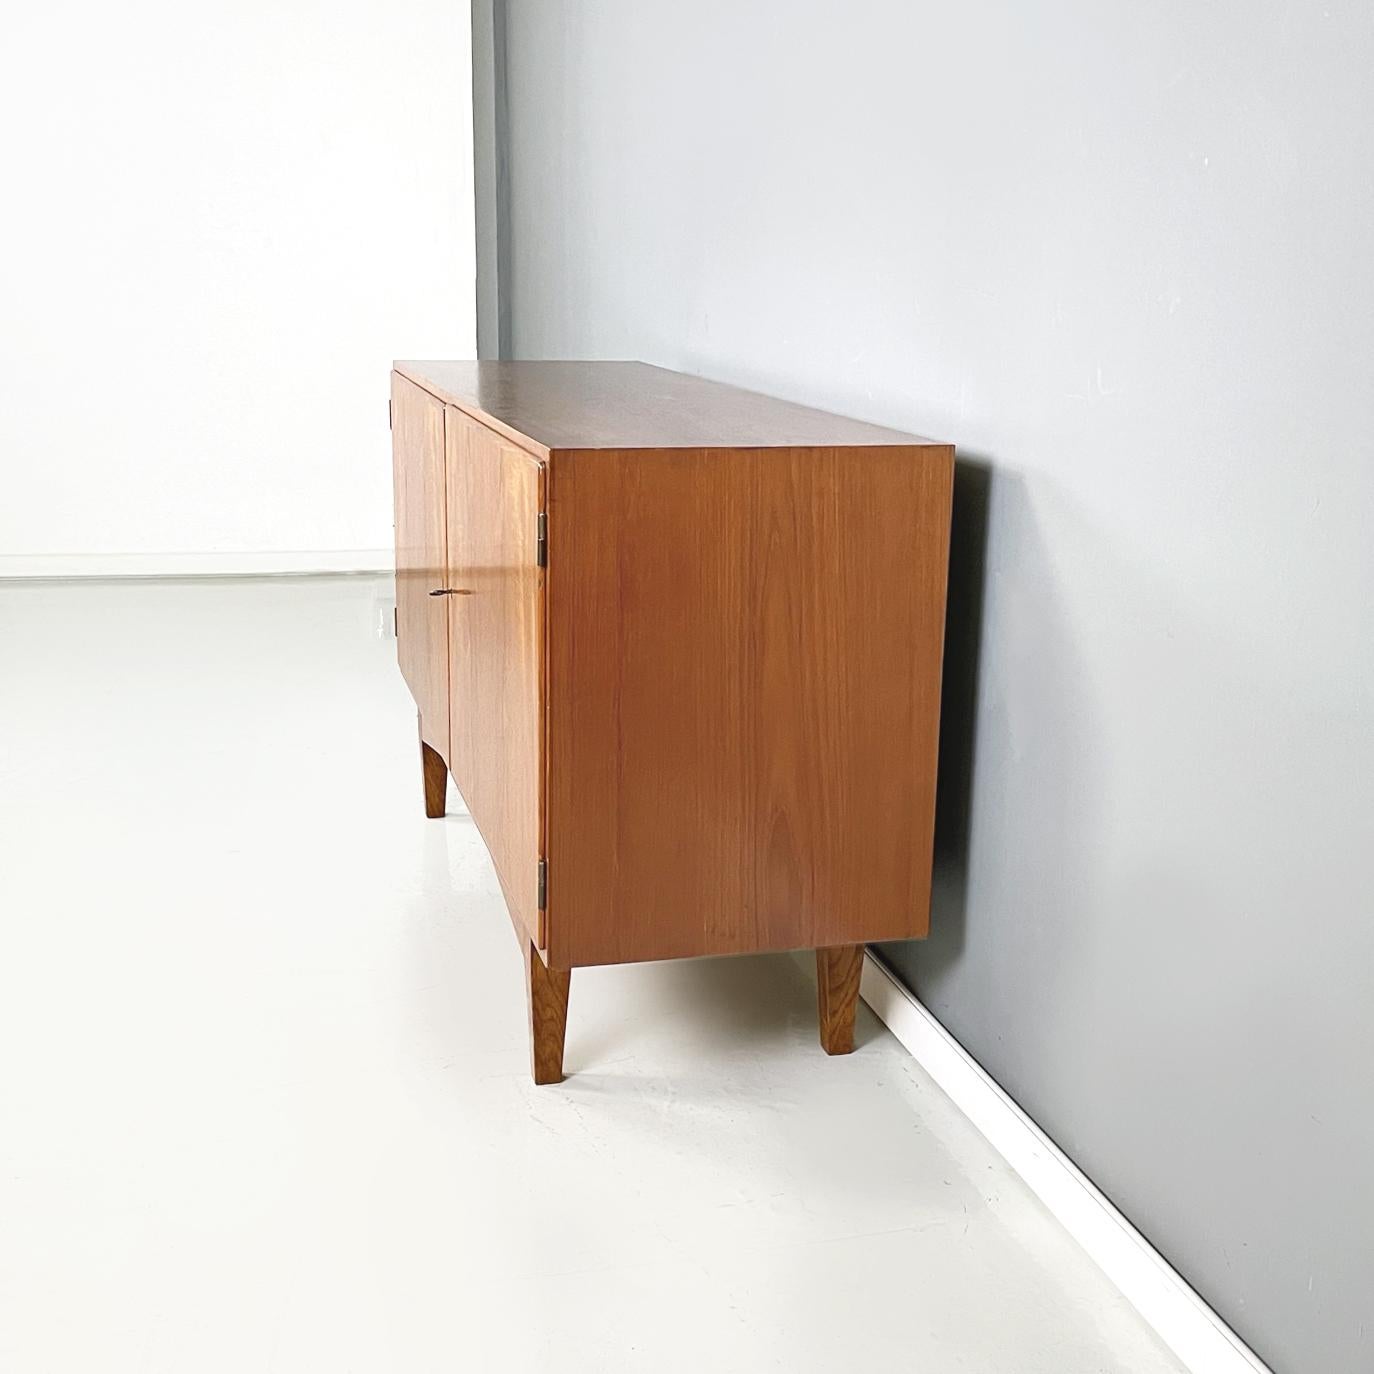 Italian Midcentury Wooden Sideboard with Drawer and Shelves, 1960s In Good Condition For Sale In MIlano, IT